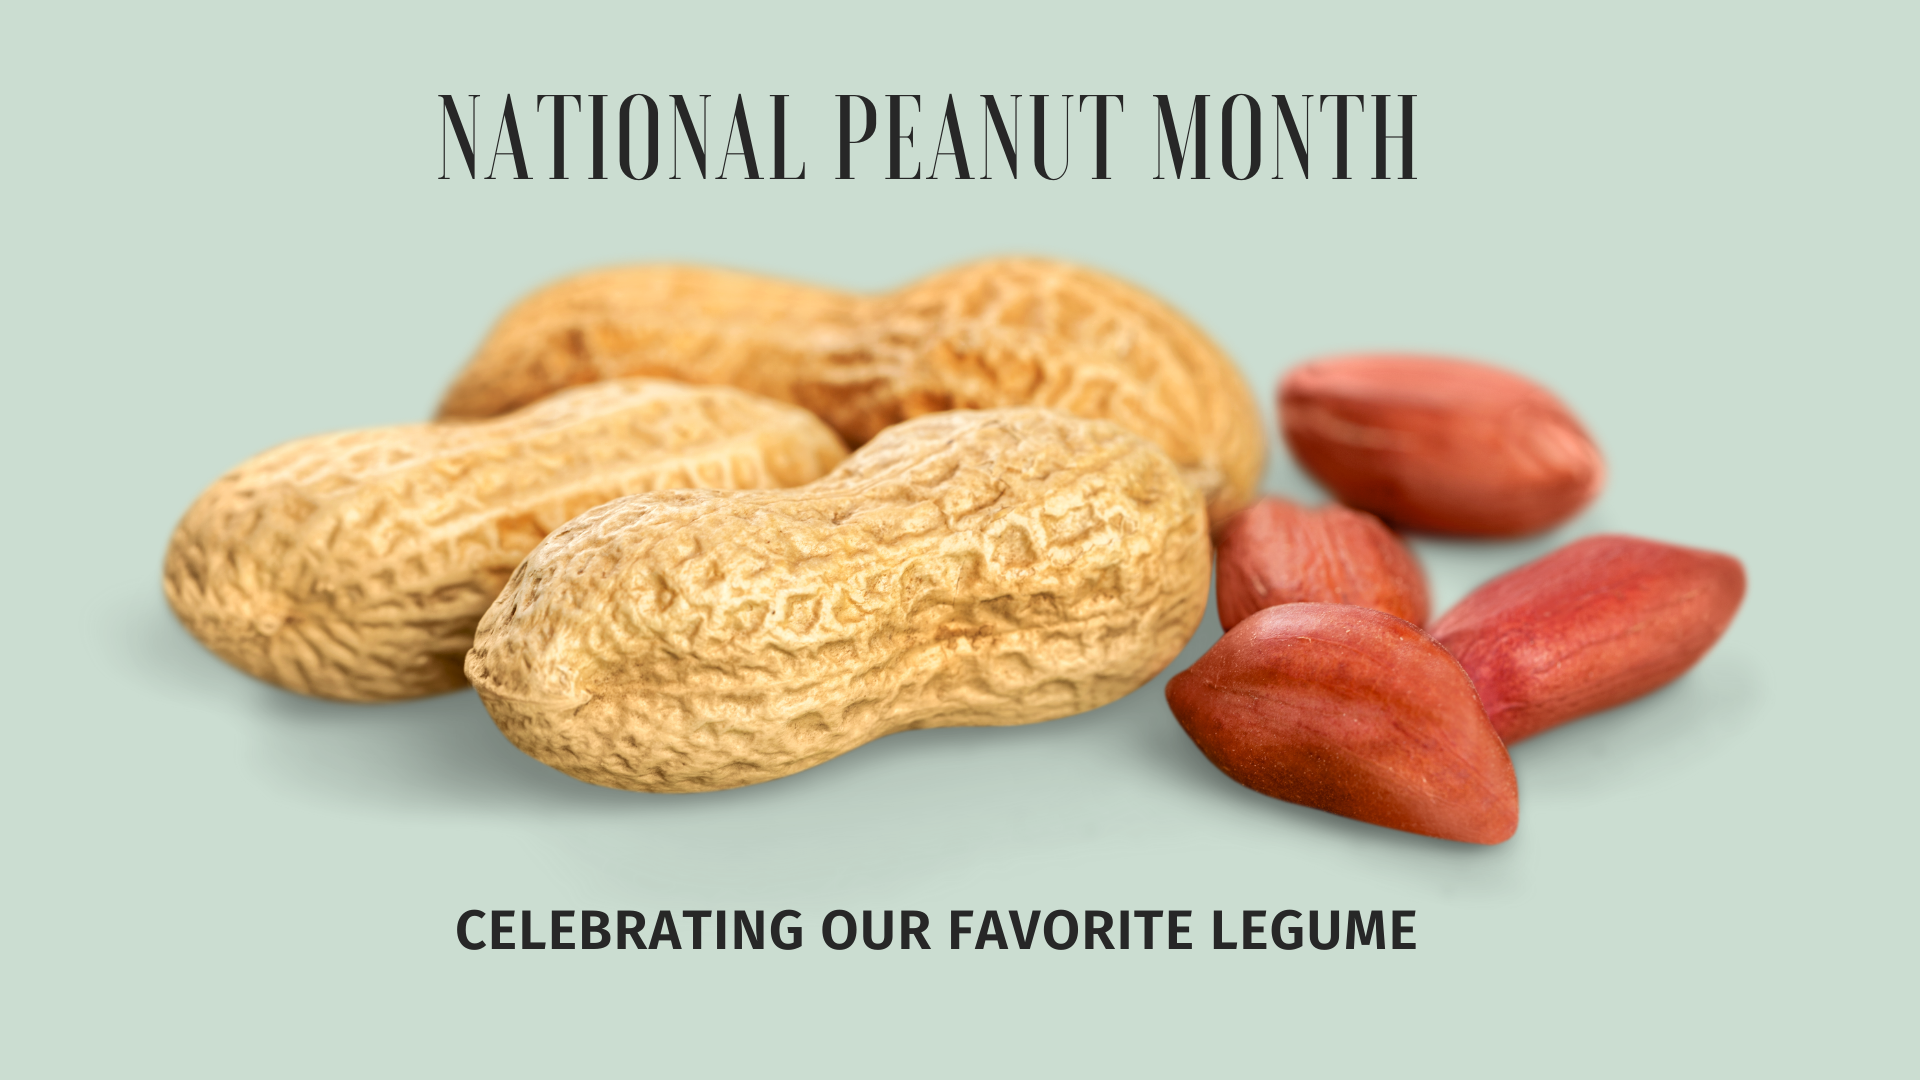 March is National Peanut Month